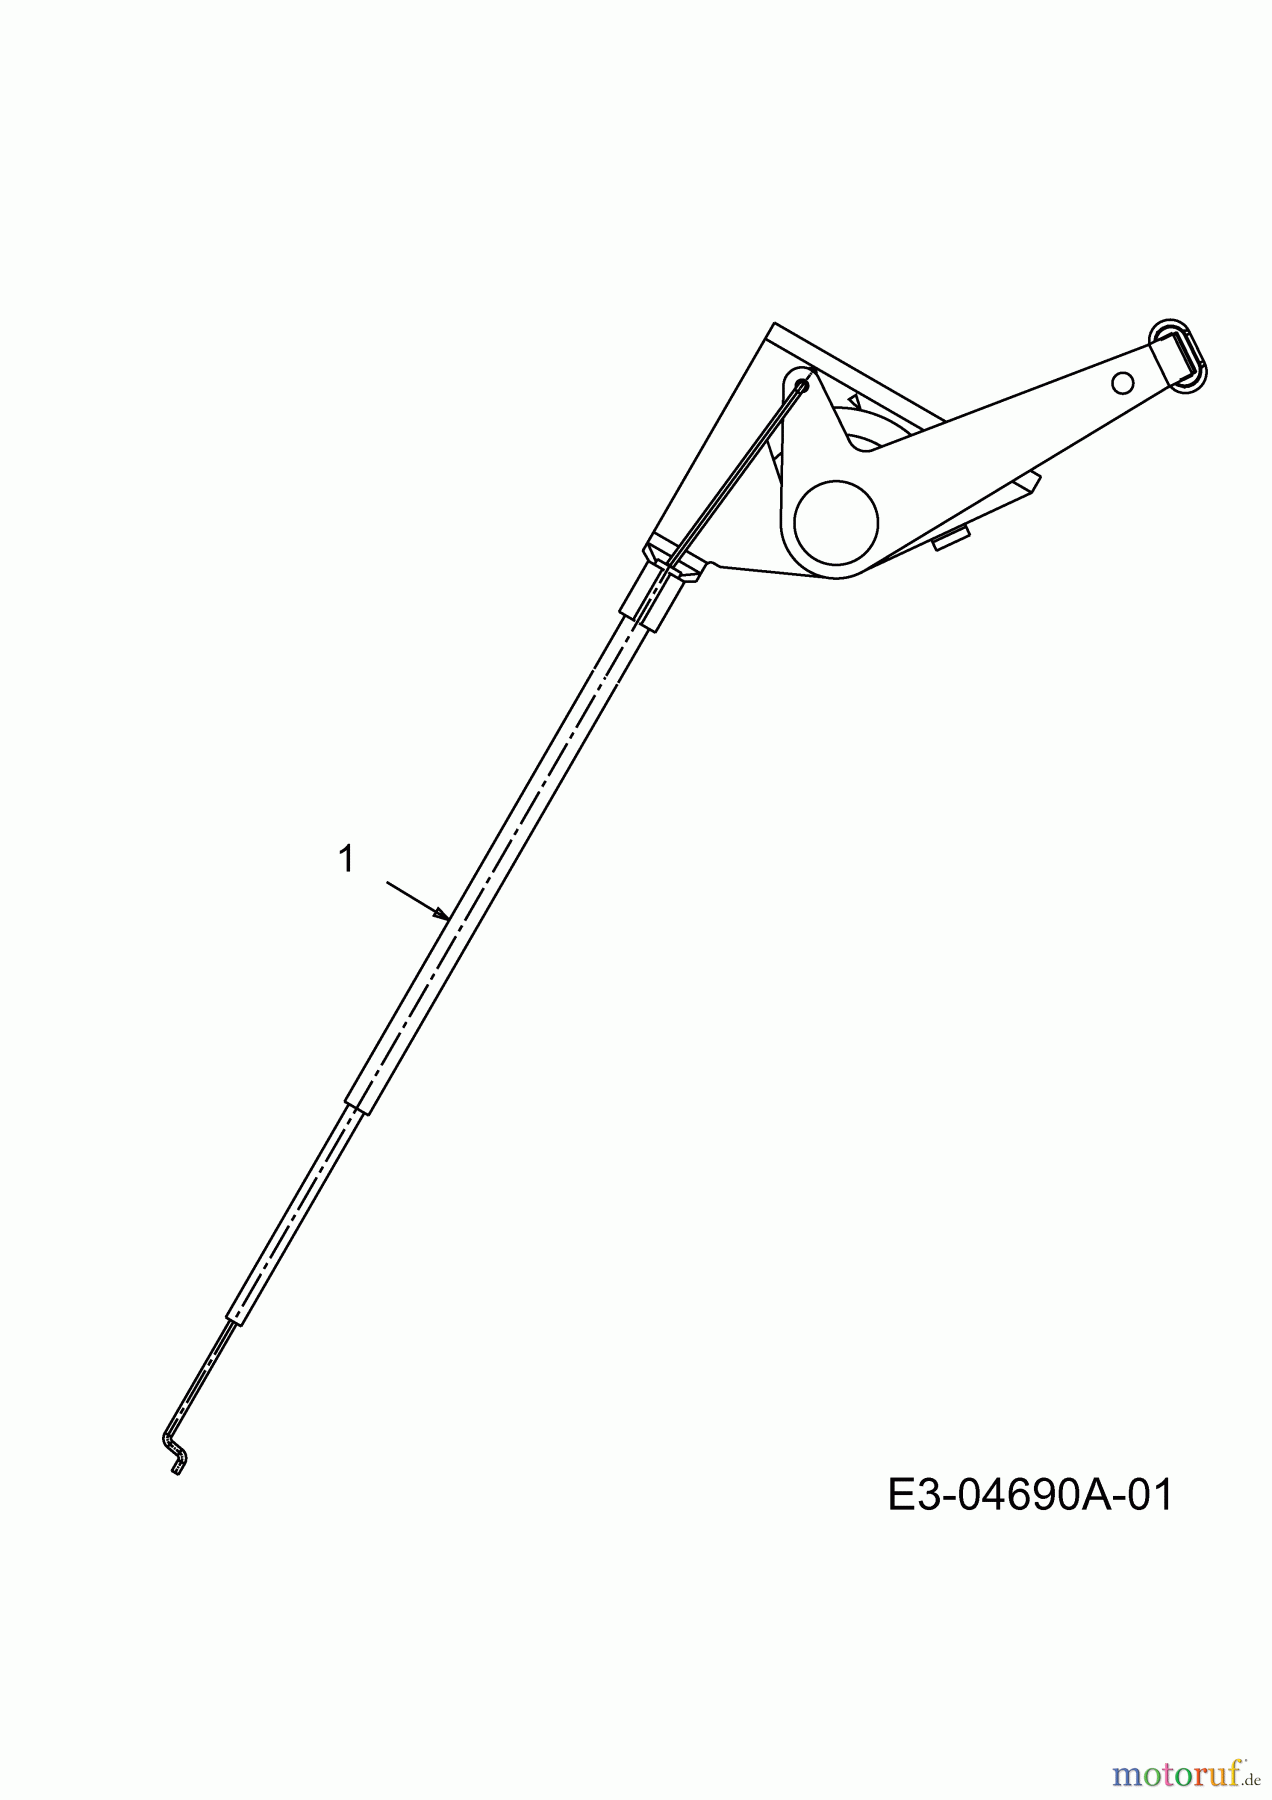  MTD untill 2011 Lawn tractors 200/107 13A7660G752  (2004) Throttle cable